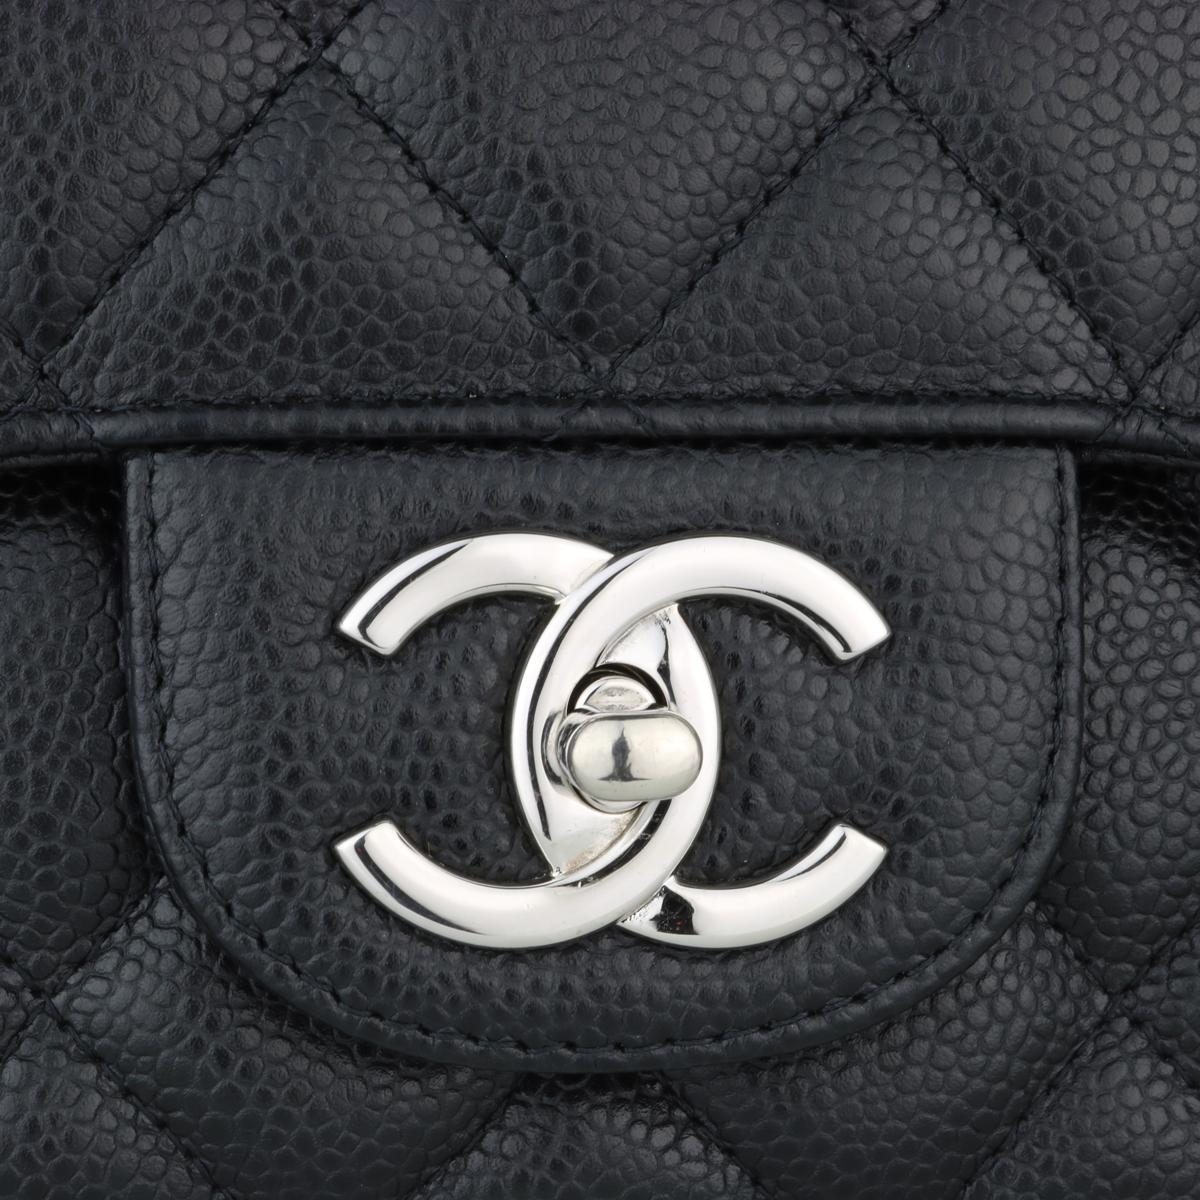 CHANEL Double Flap Maxi Bag Black Caviar with Silver Hardware 2014 In Good Condition For Sale In Huddersfield, GB